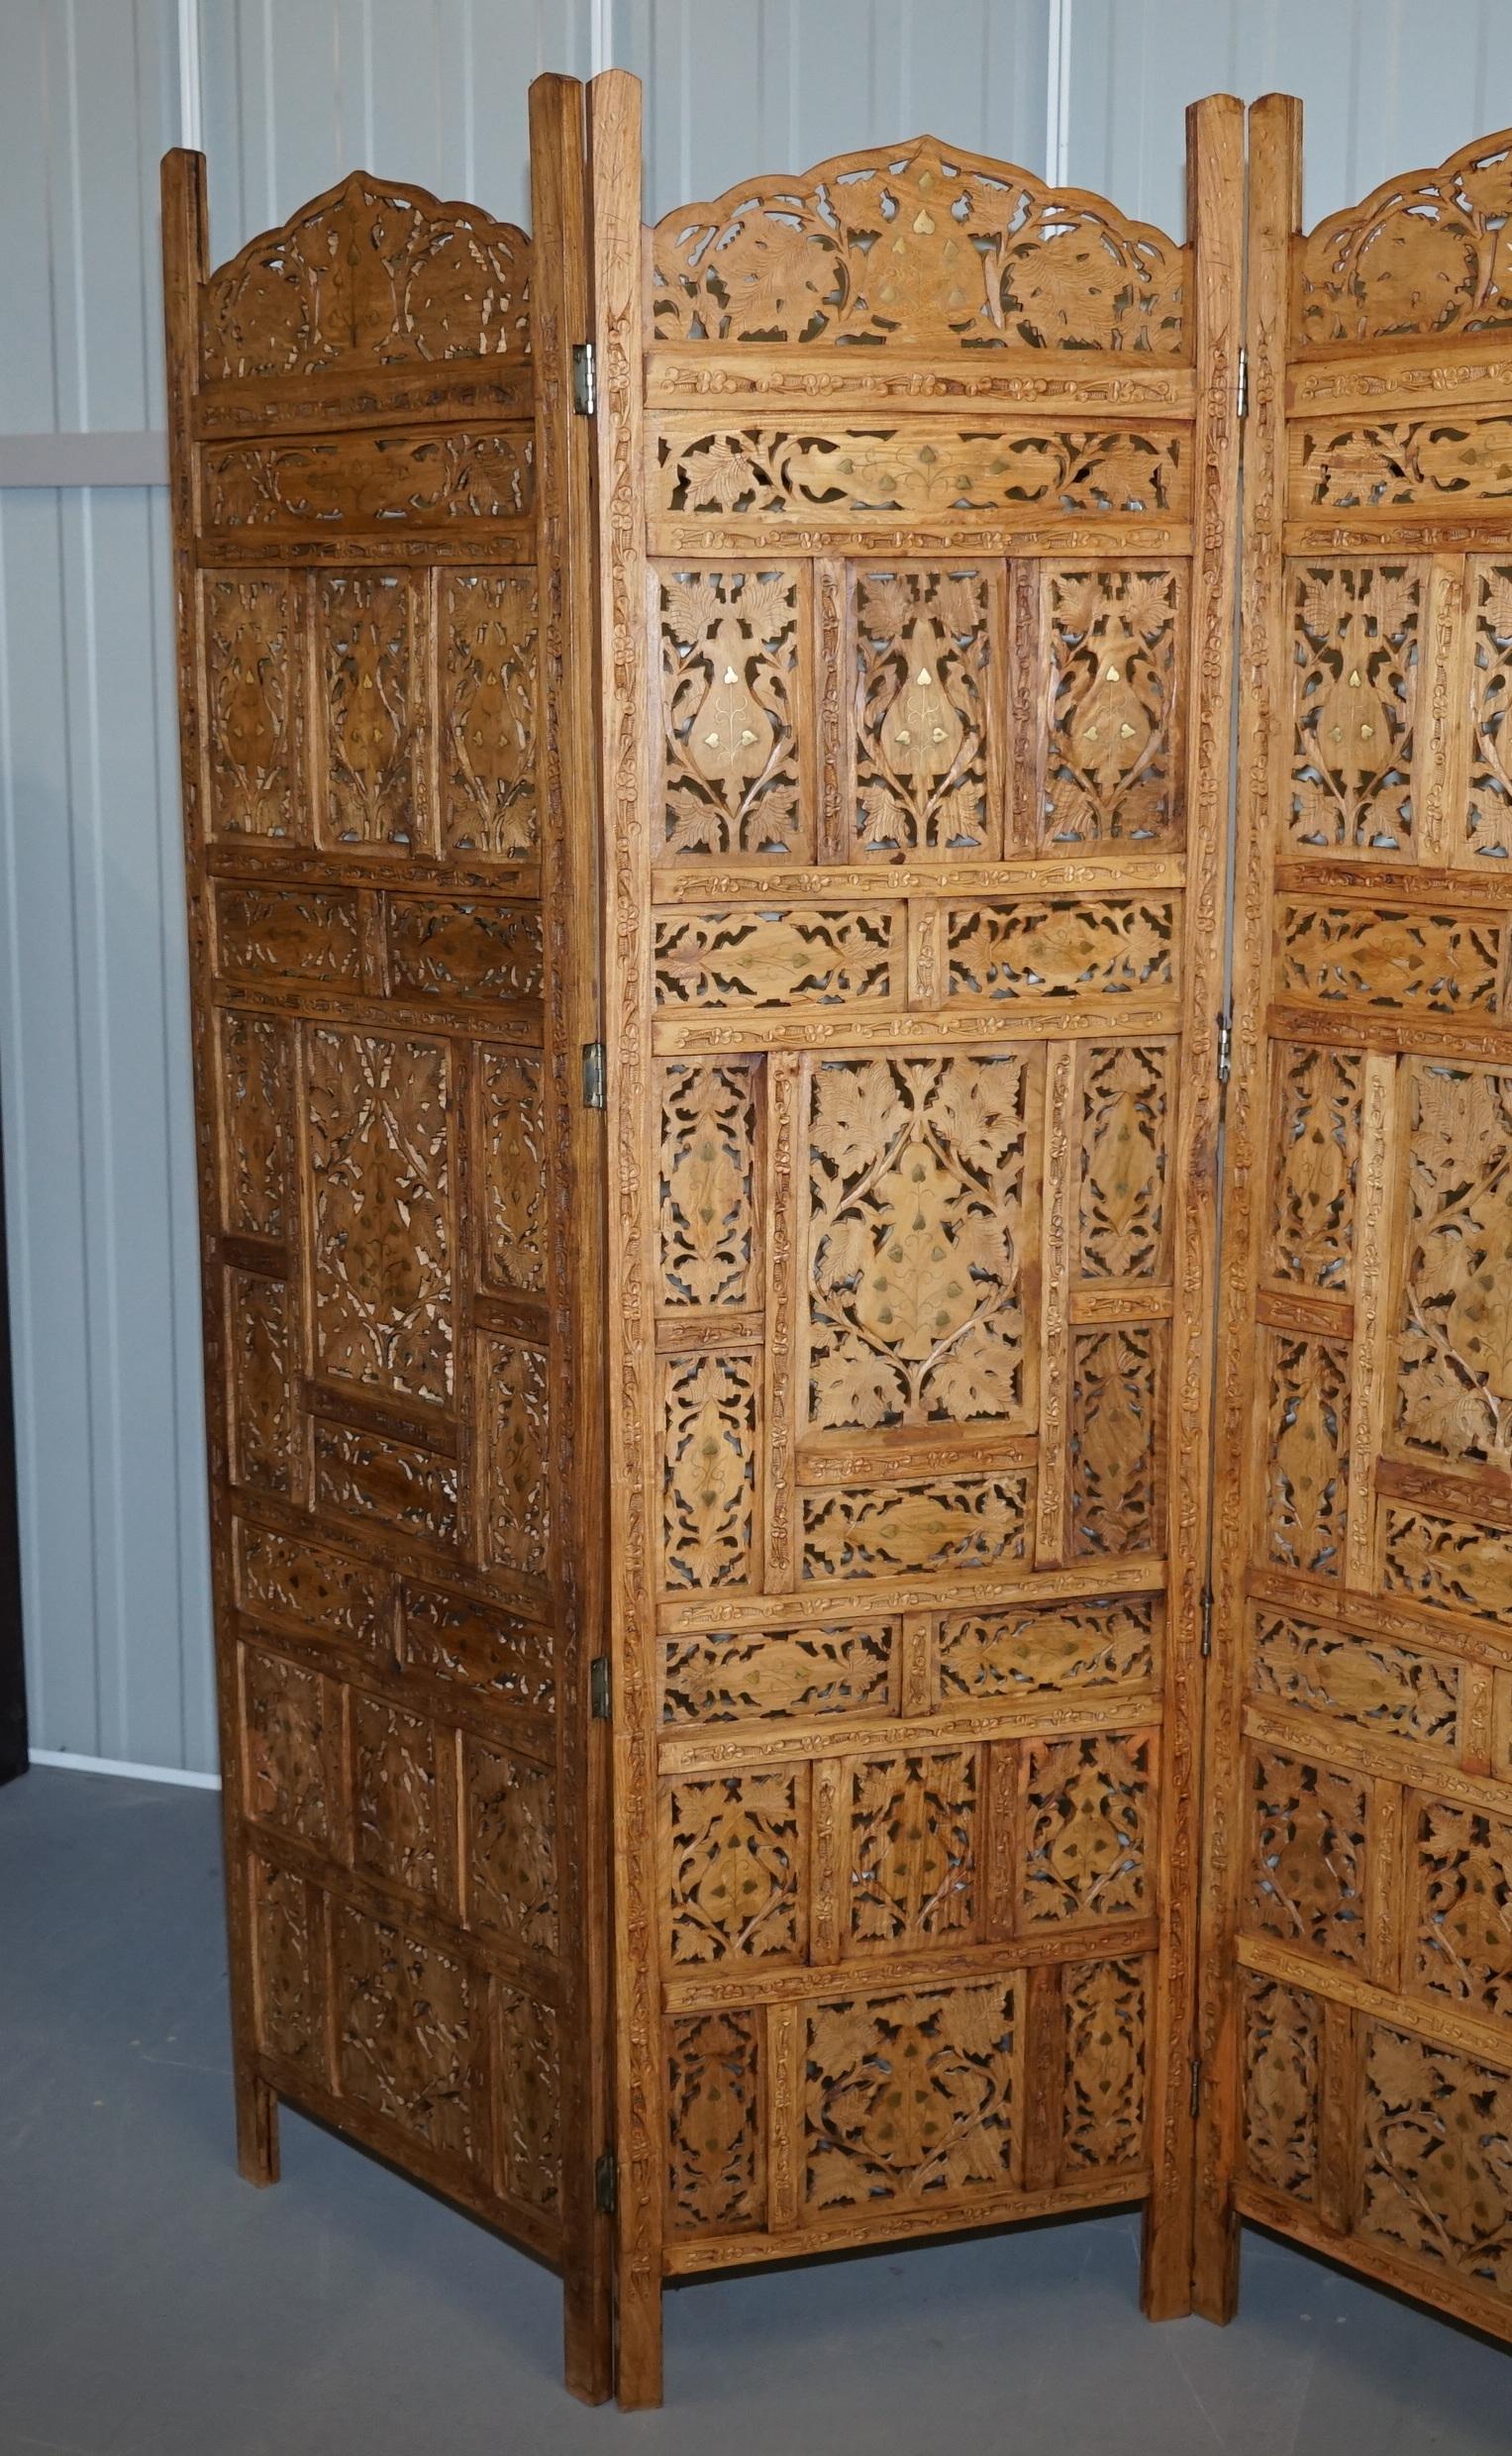 We are delighted to offer for sale this stunning and very decorative vintage hand carved solid teak with brass inlay room divider or folding screen

A truly stunning piece of art furniture, I absolutely love everything about this, it’s a multi